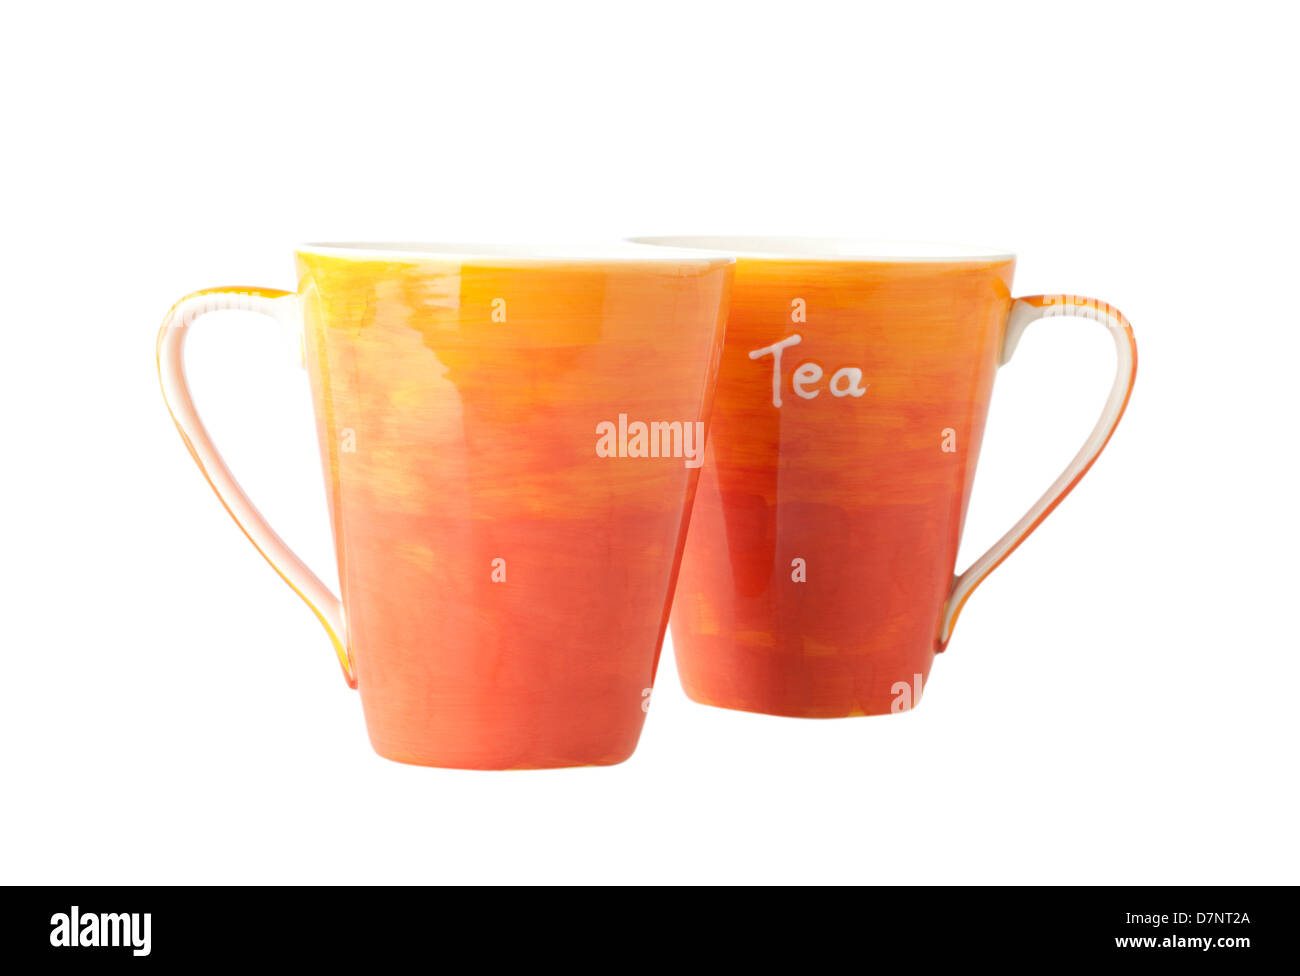 Two colorful porcelain mugs on white background Stock Photo